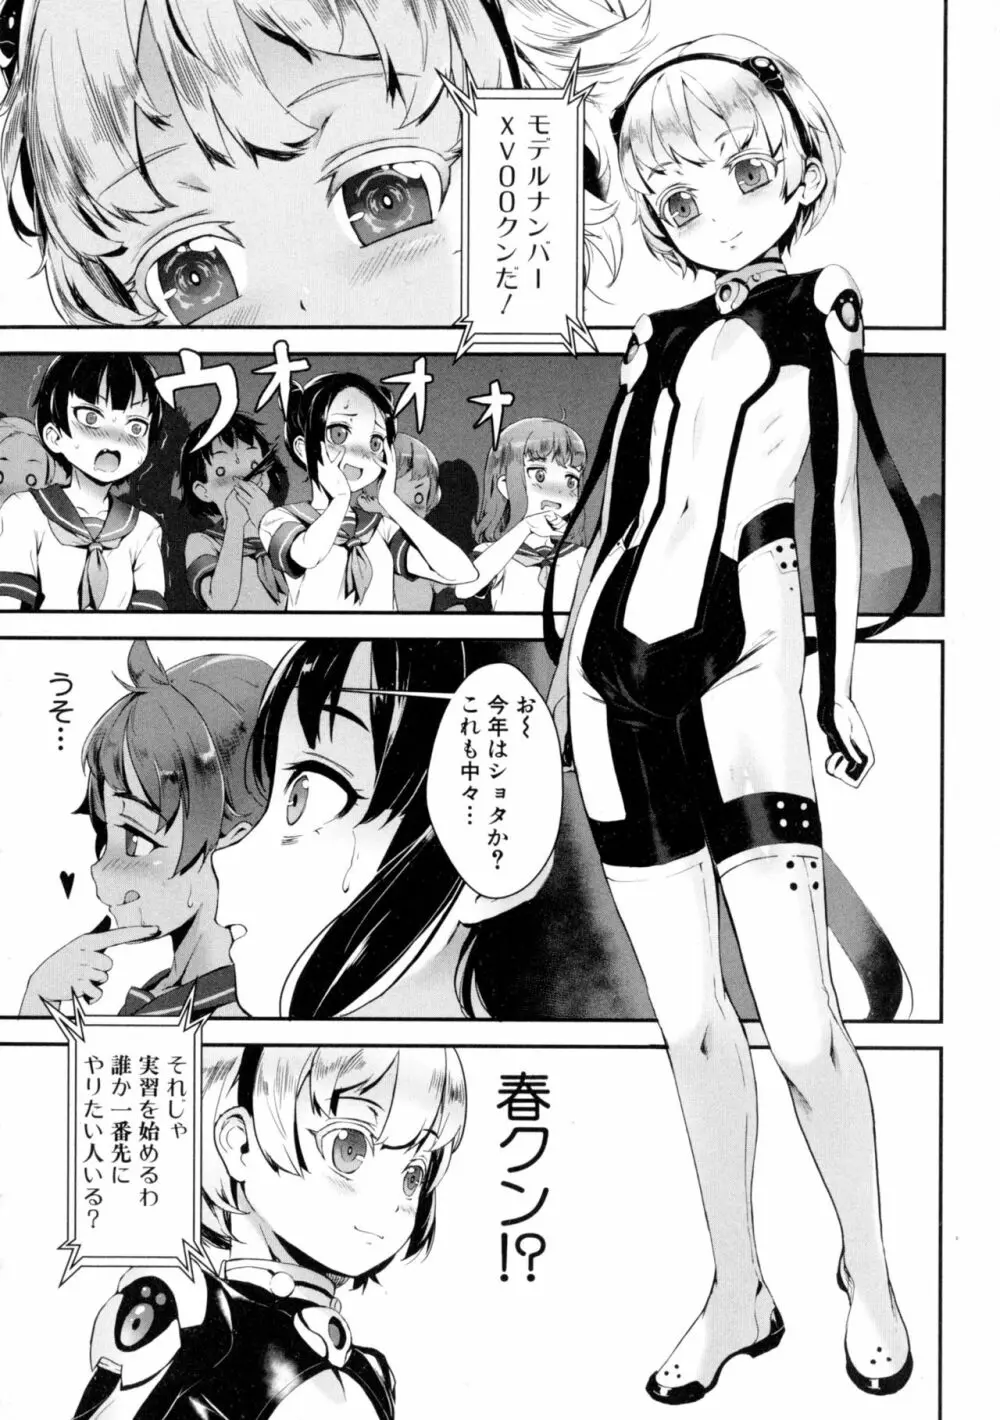 T.F.S 第1-4話 + 御負け PV Page.8